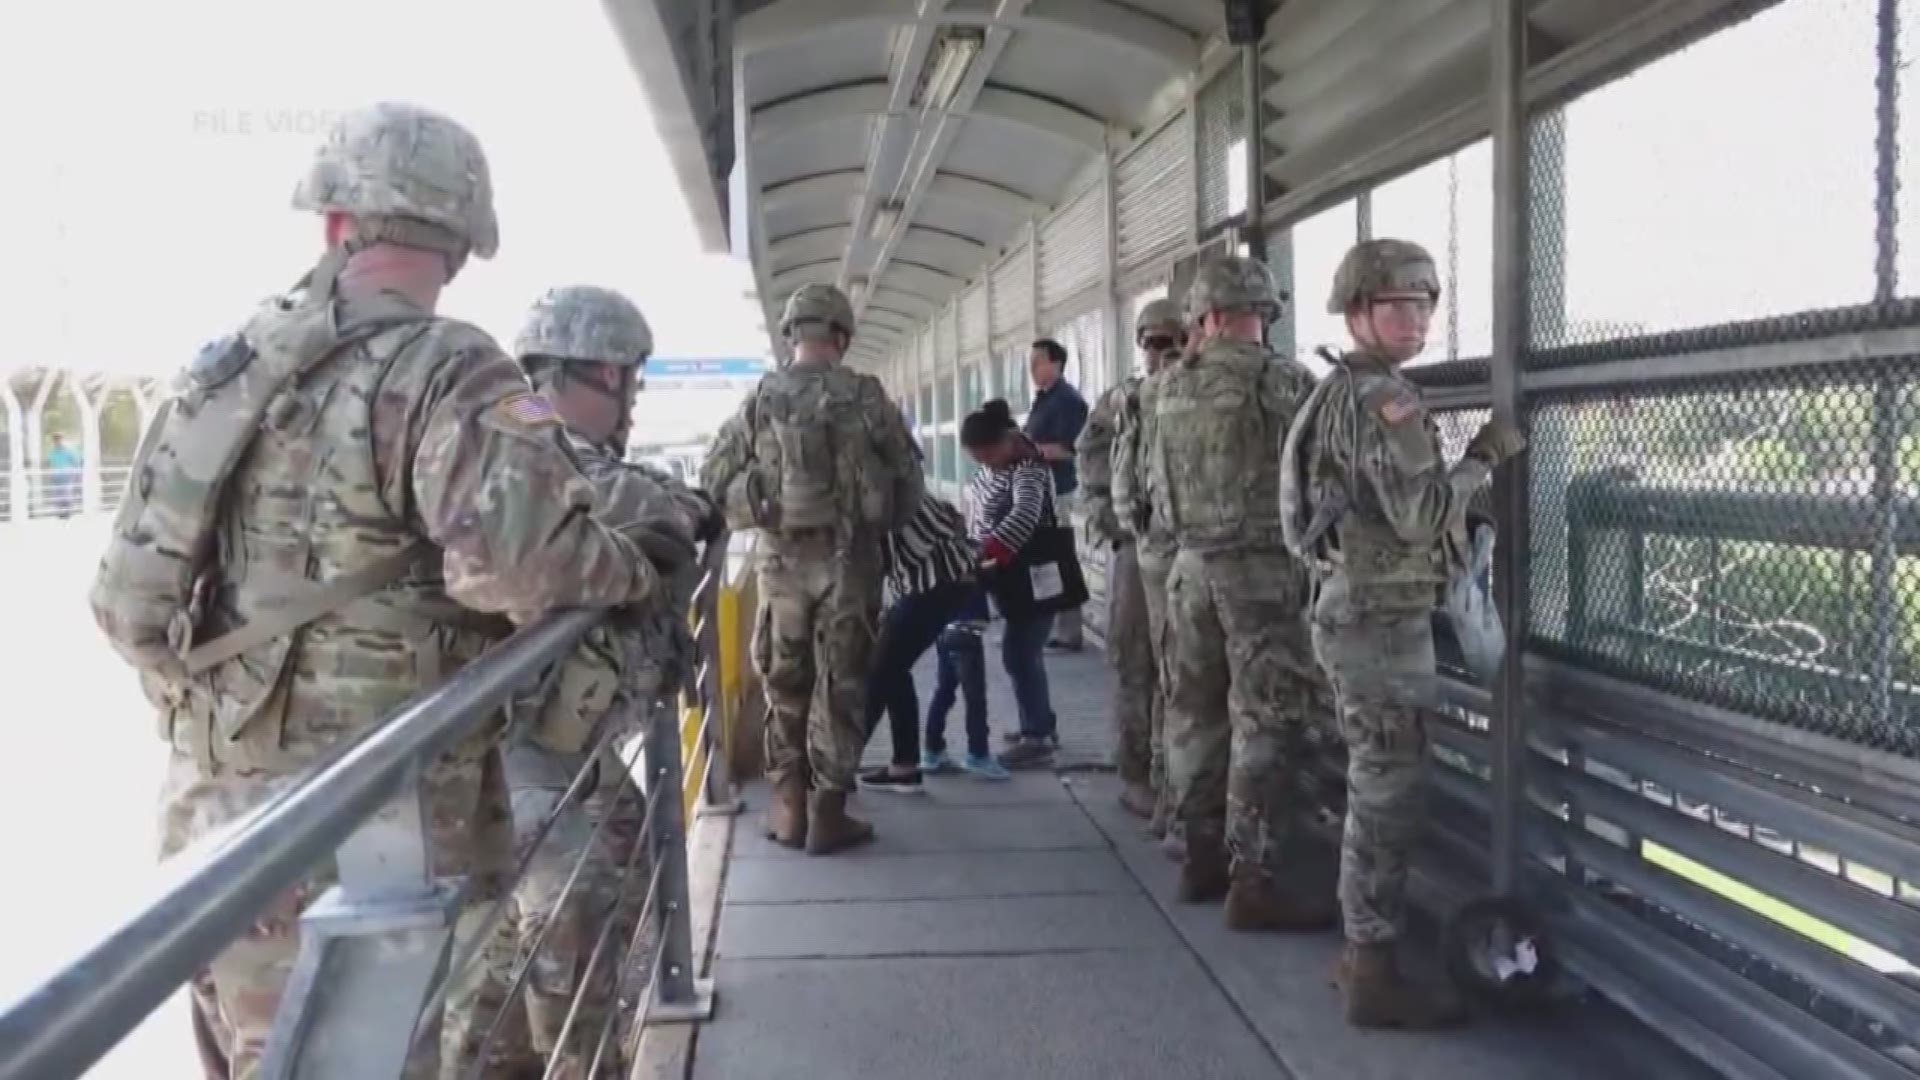 As many as 600 military troops have been sent to Eagle Pass, Texas, to reinforce border security after a caravan carrying a large amount of Central American migrants arrived last Sunday. Governor Abbott says he wants the national guard to set up an encampment for the troops.